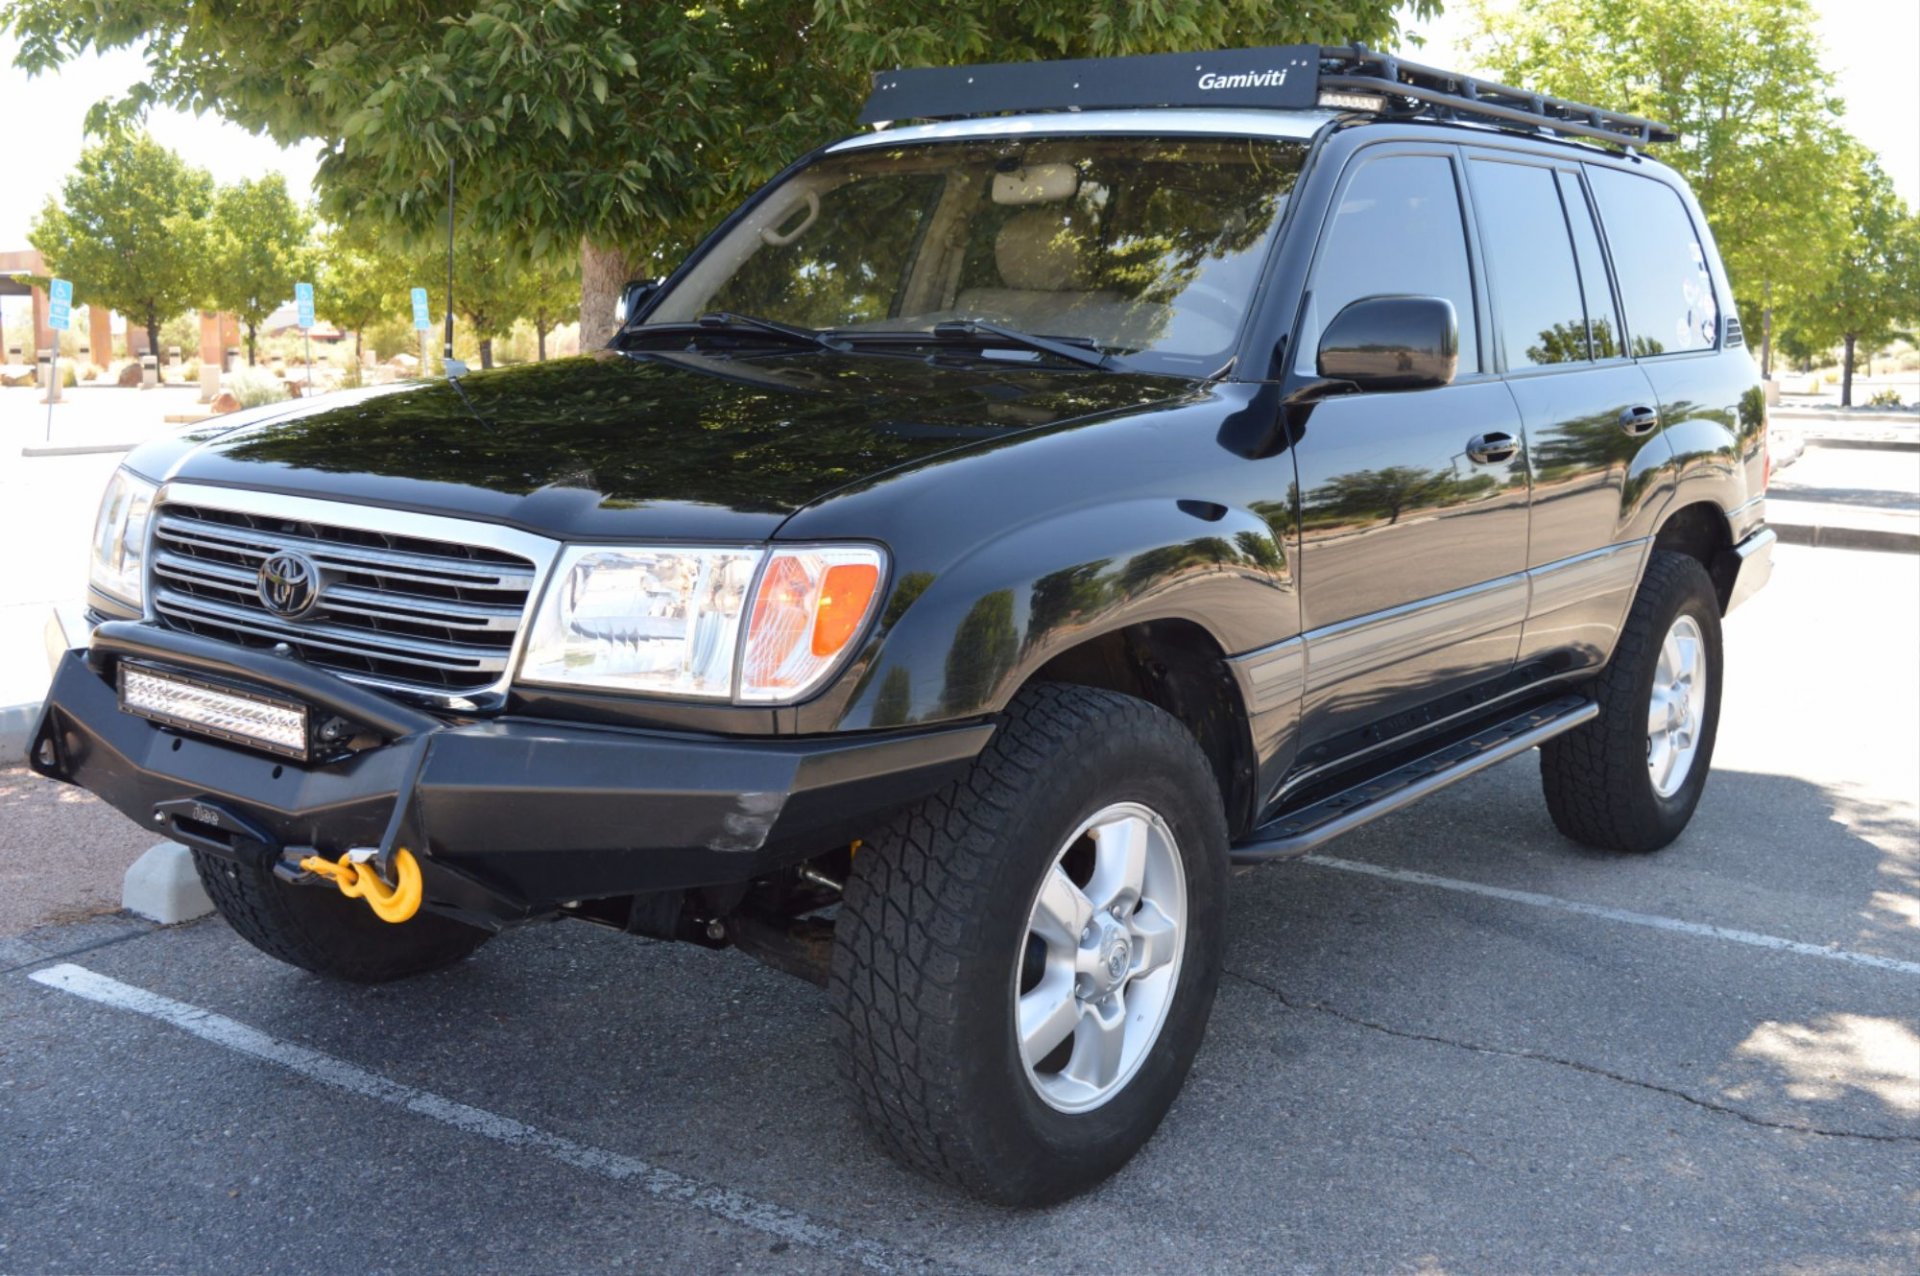 For Sale - 2003 Land Cruiser - Luxury Daily or Extreme Off Road ...